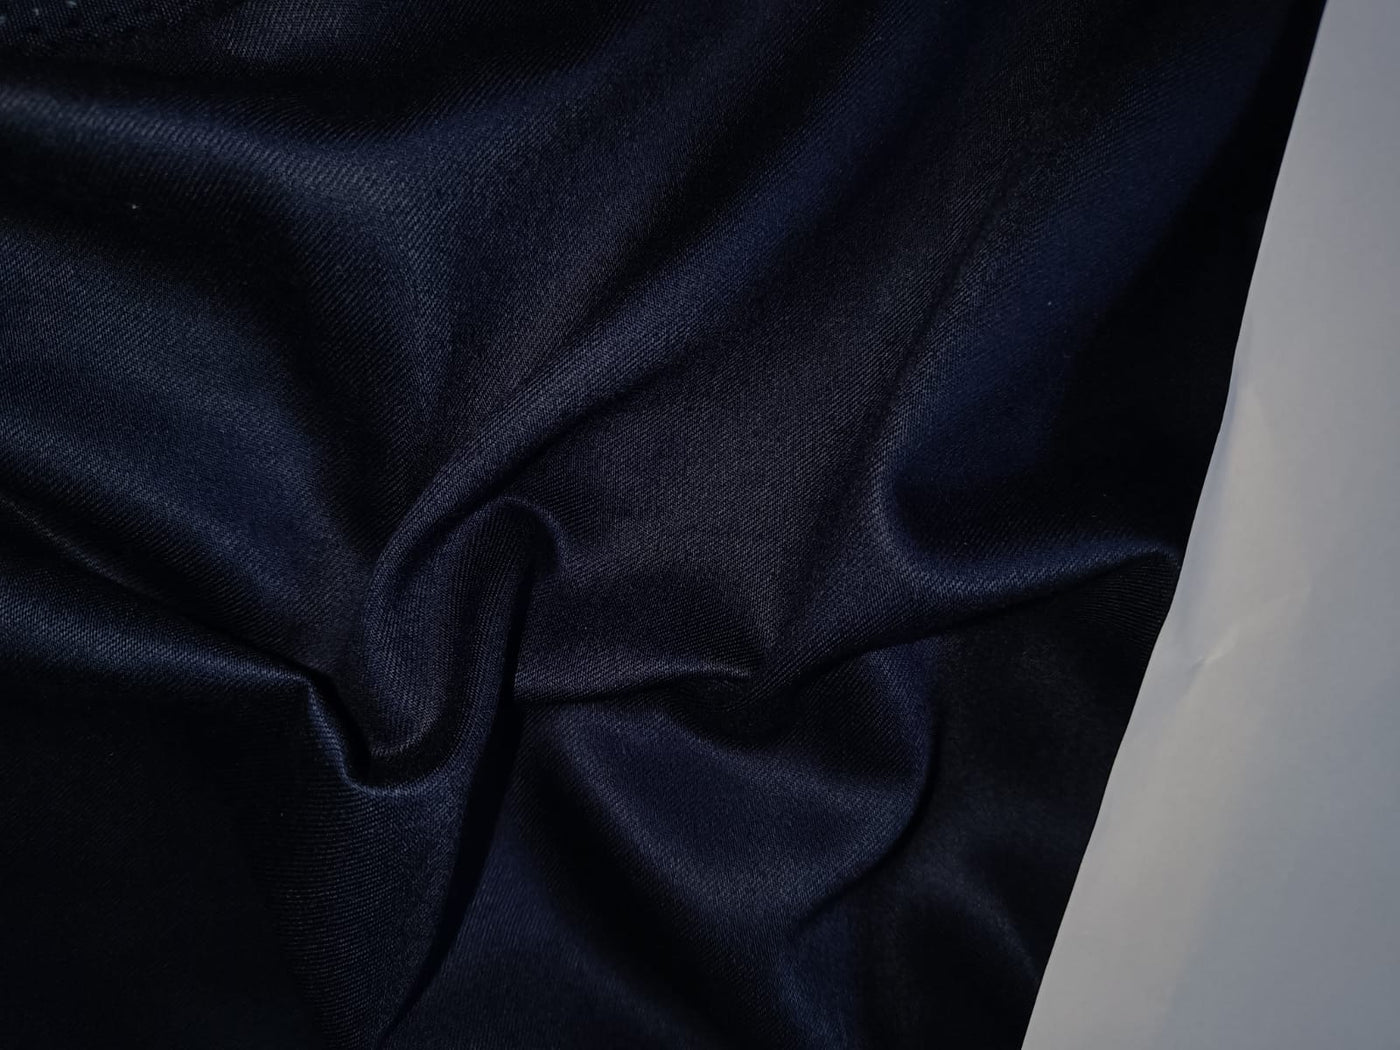 Bamboo Twill Weave 200gsm fabric 54" wide available in two colors black and navy